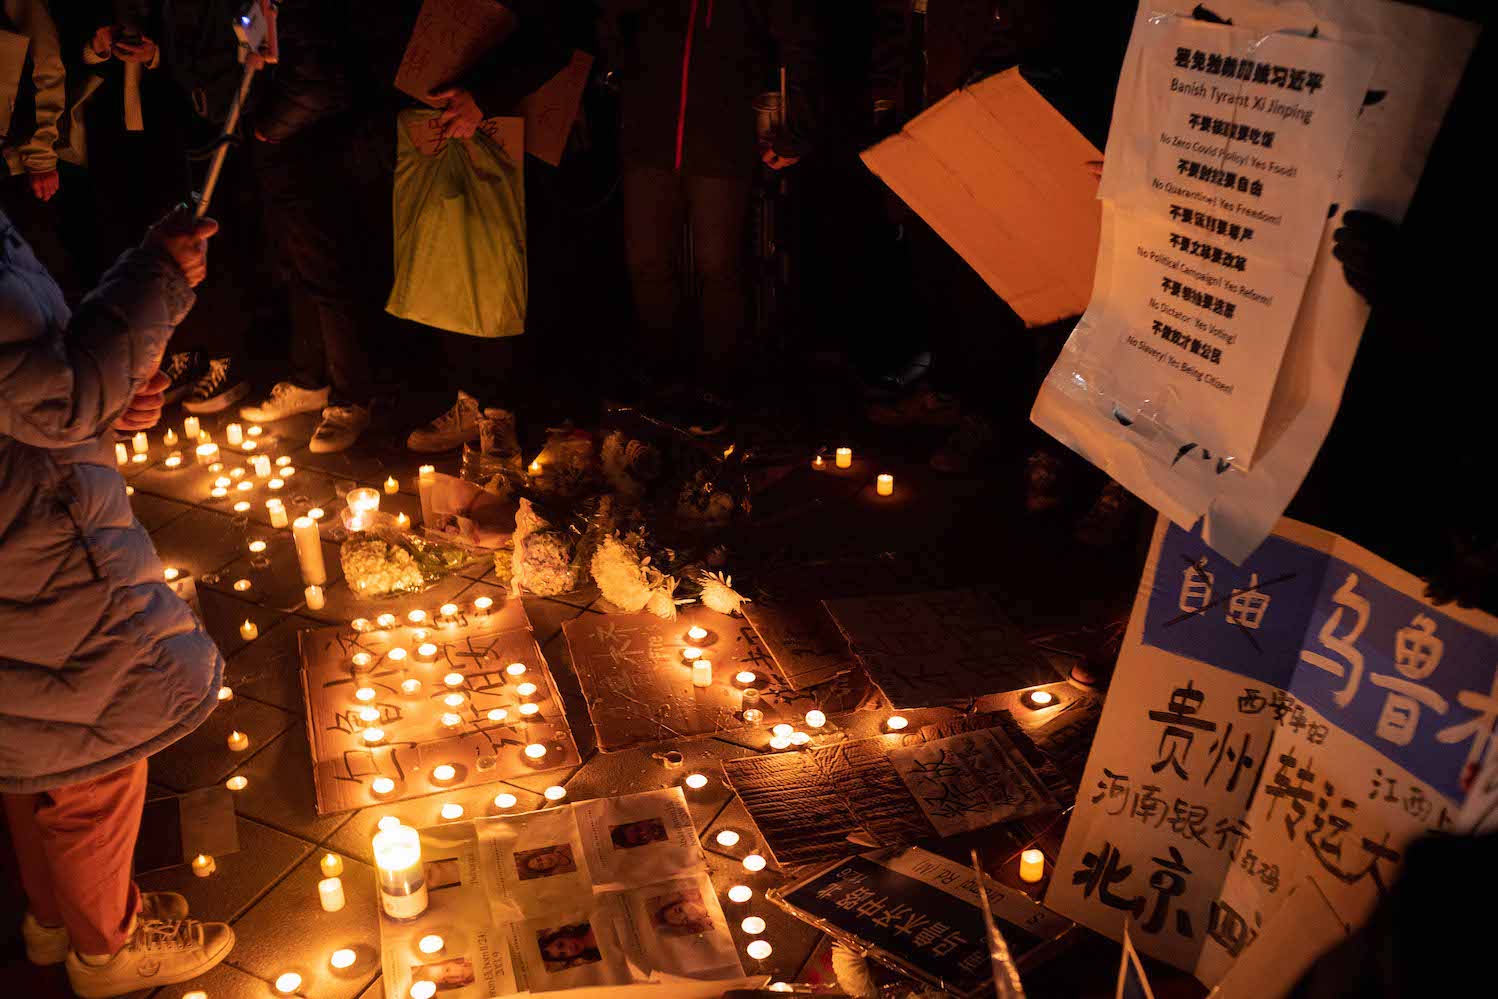 An arrangement of candles laid on the ground with commemorative texts in Mandarin written on posters and papers around the candles.